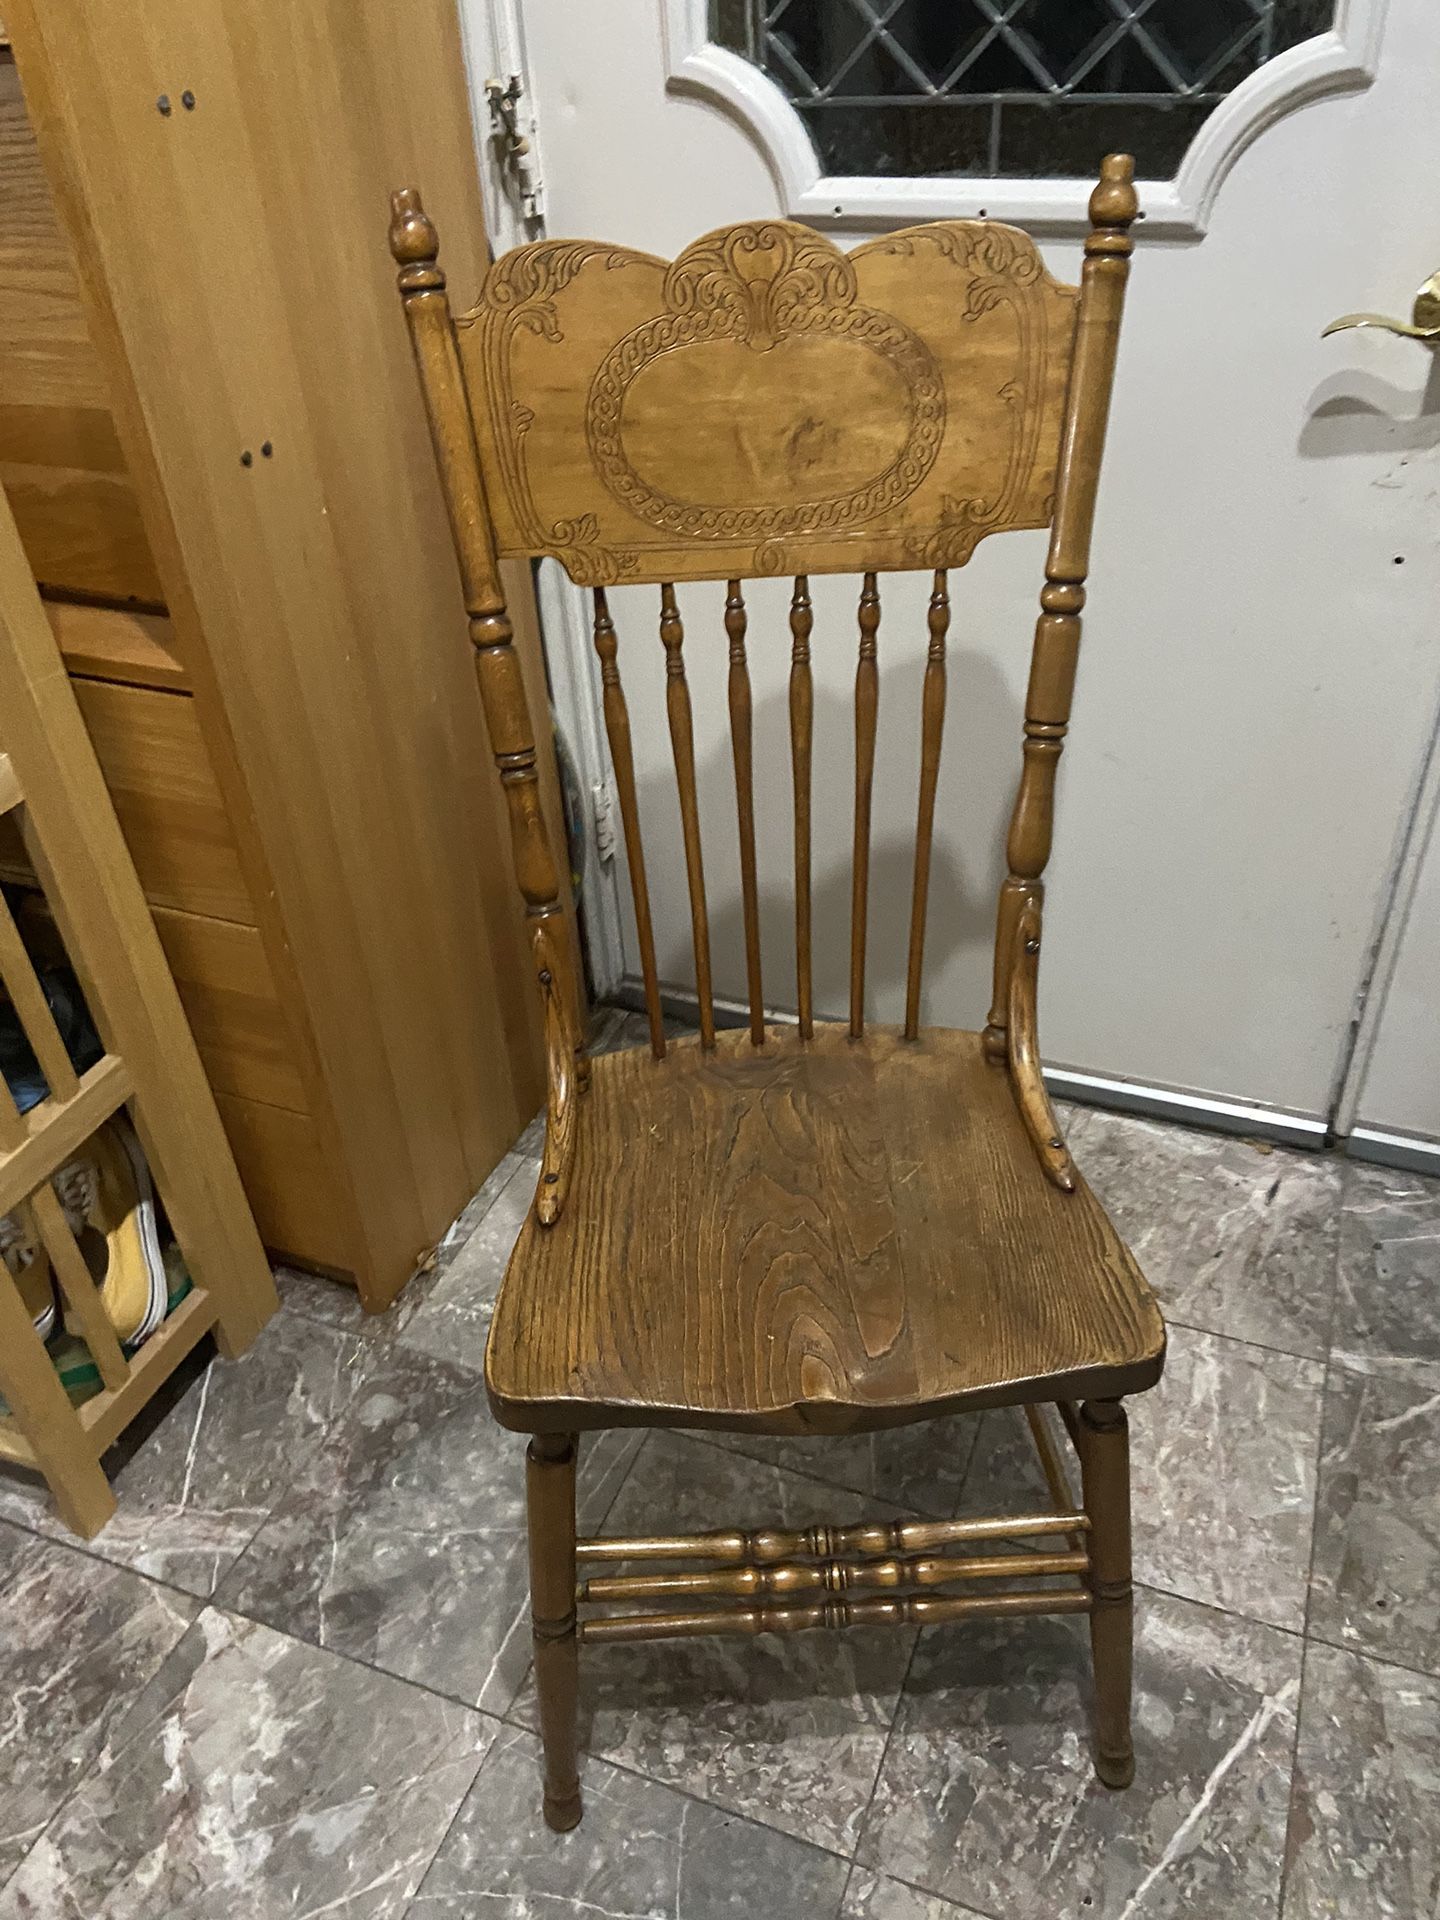 Wooden Chair $20 Sturdy 